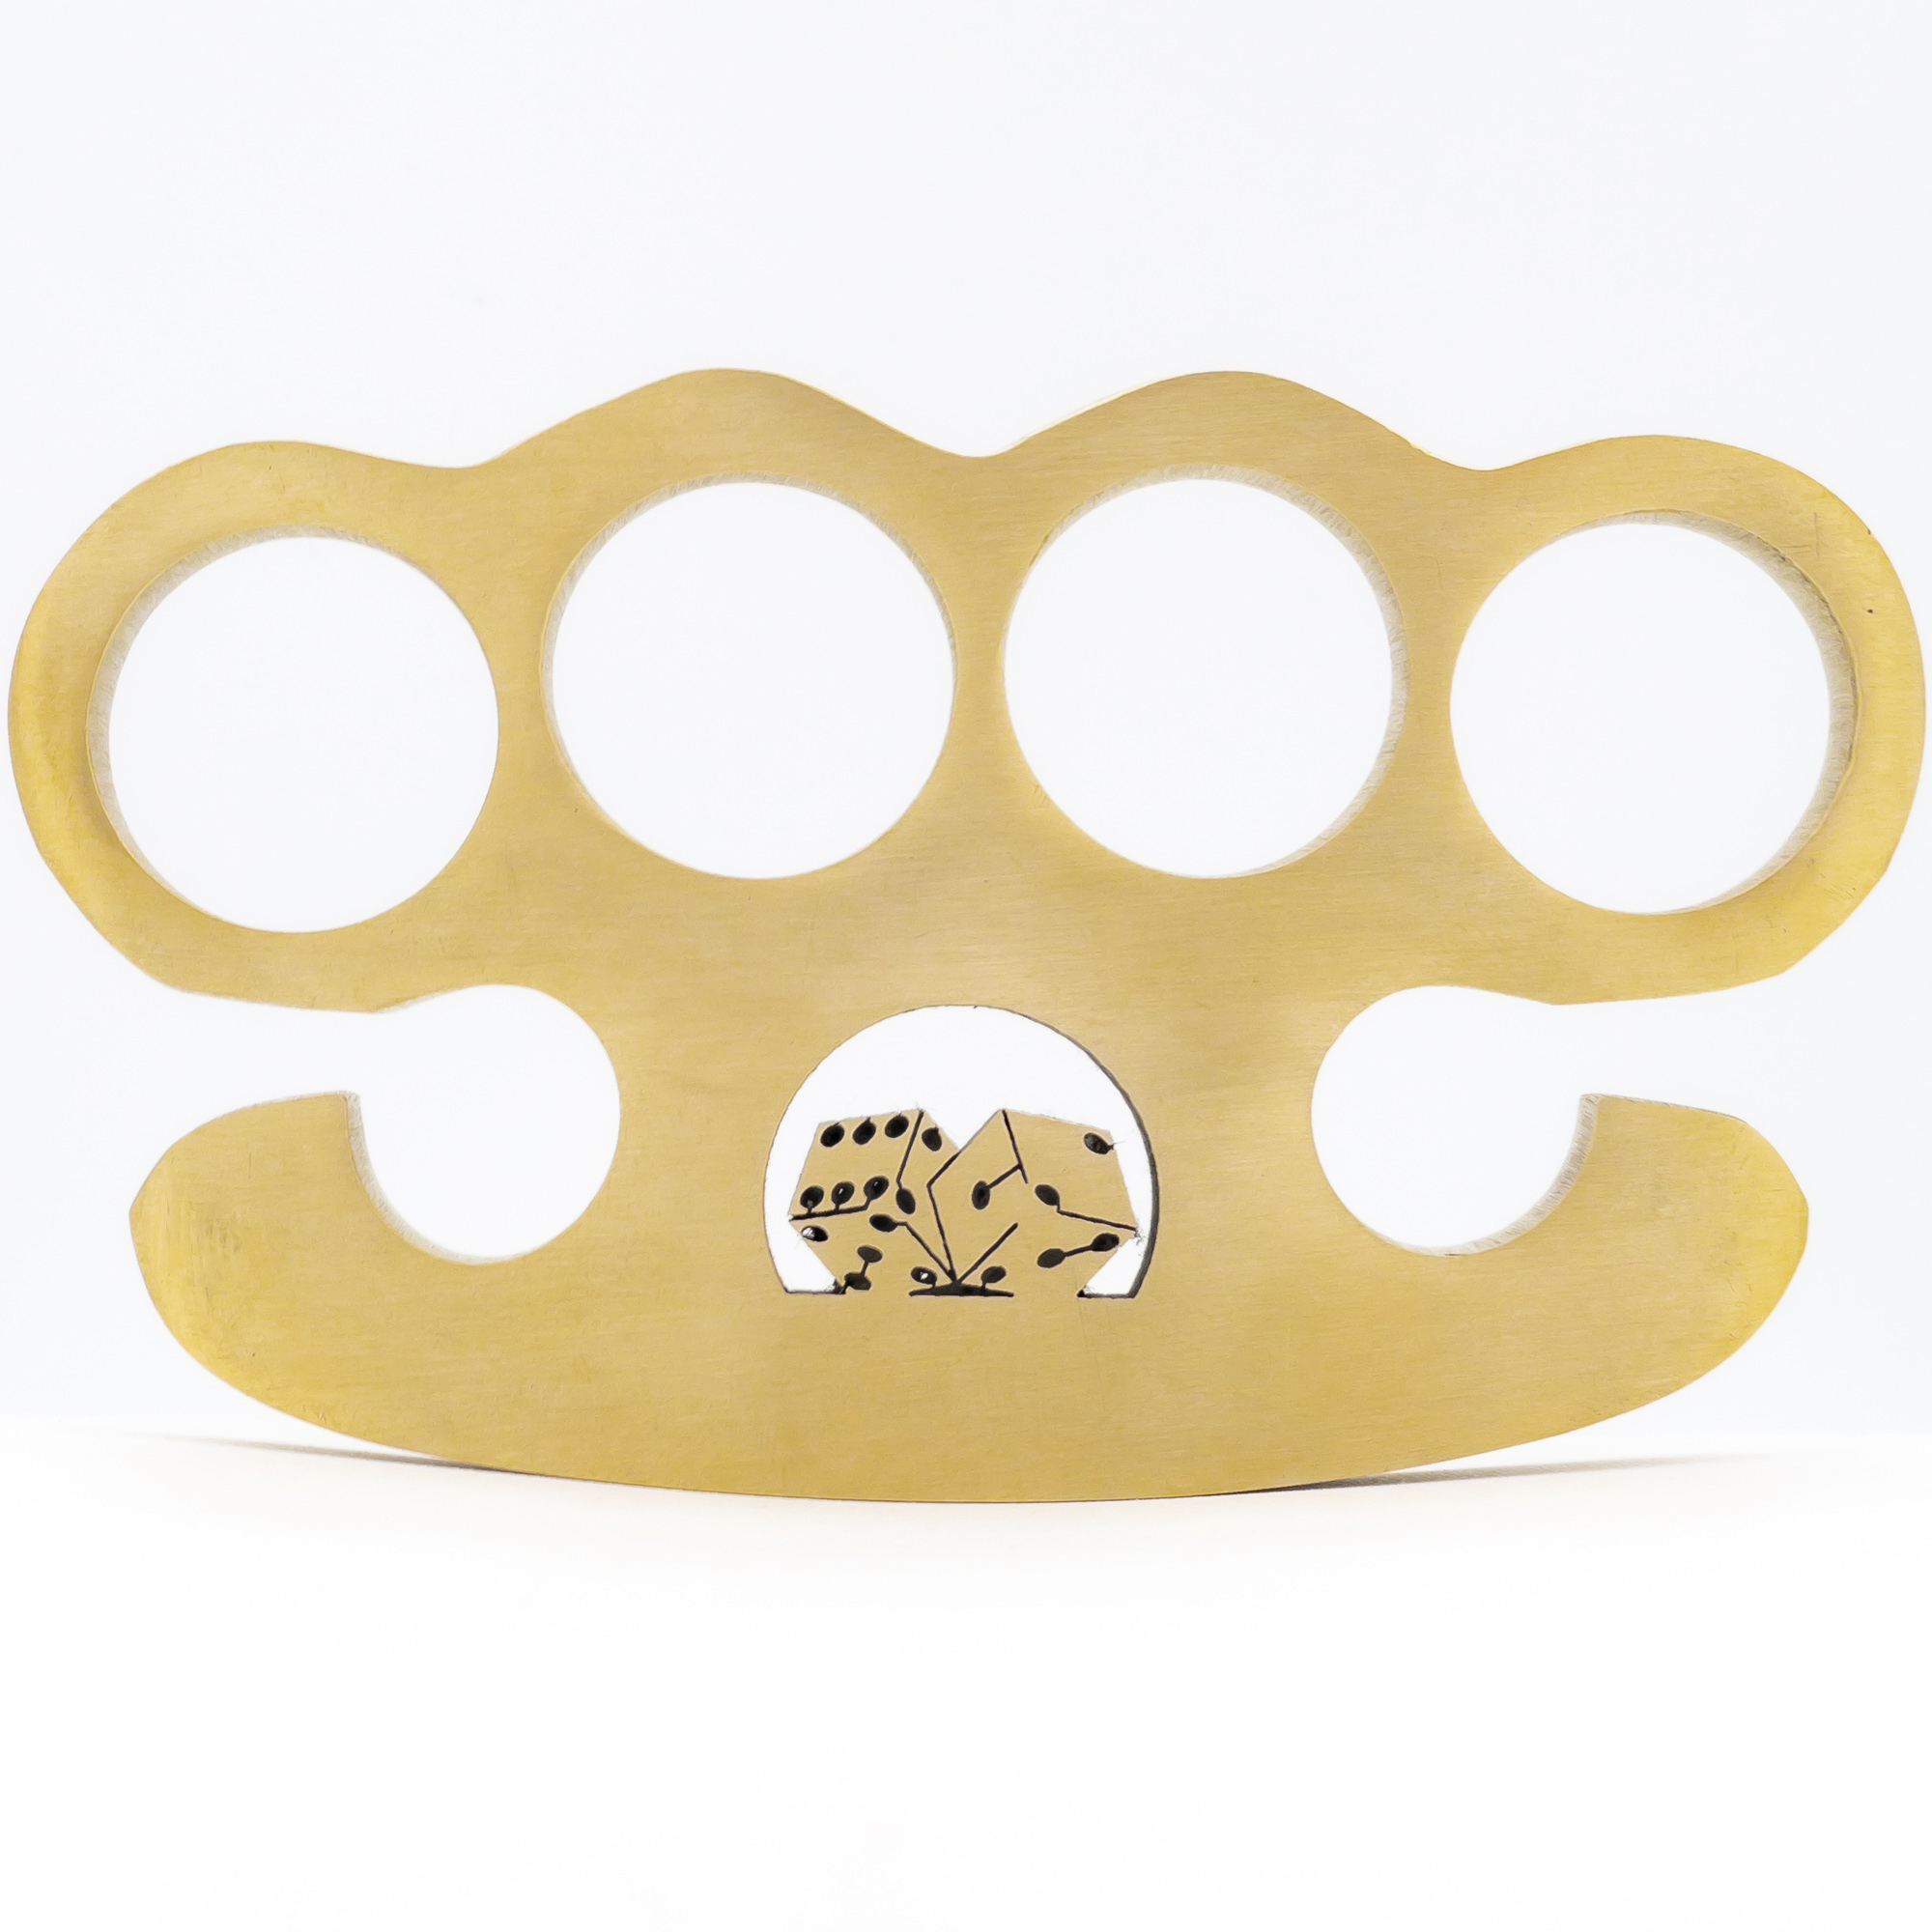 Lady Luck 100% Pure Brass Knuckle Paper Weight Accessory